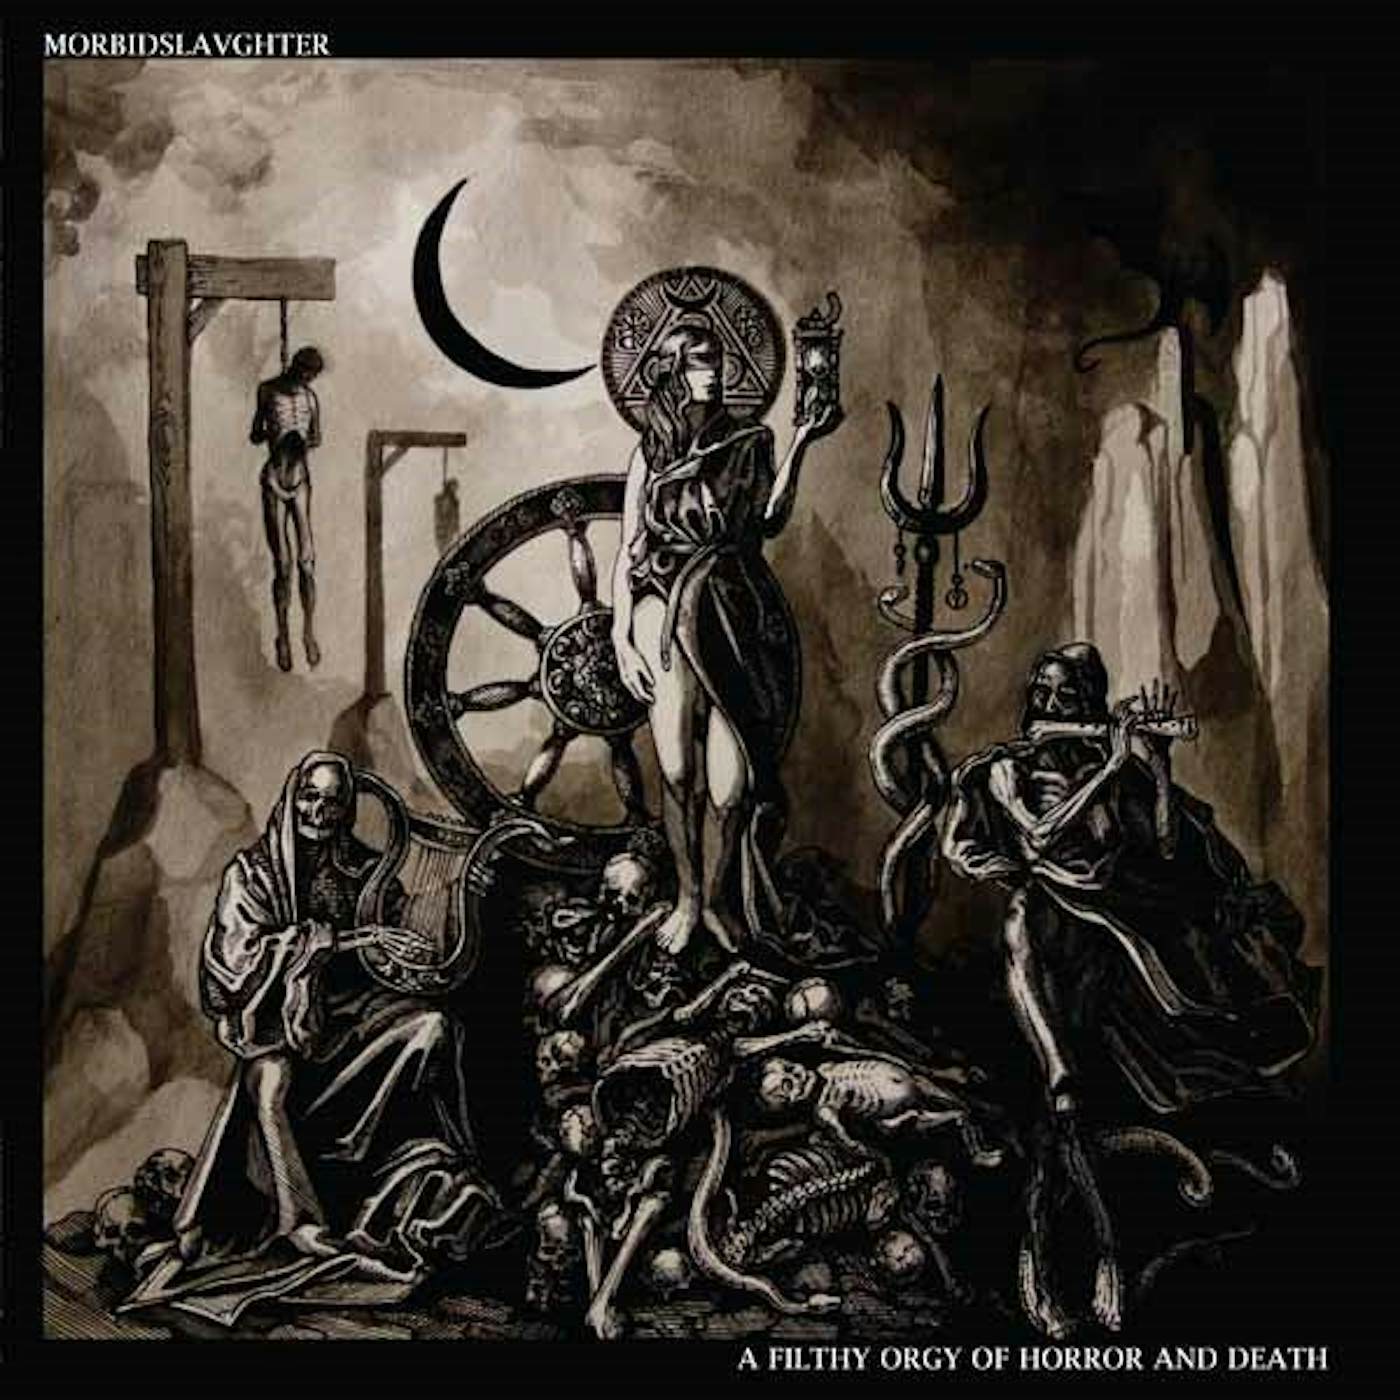 Morbid Slaughter LP - A Filthy Orgy Of Horror And Death (Vinyl)